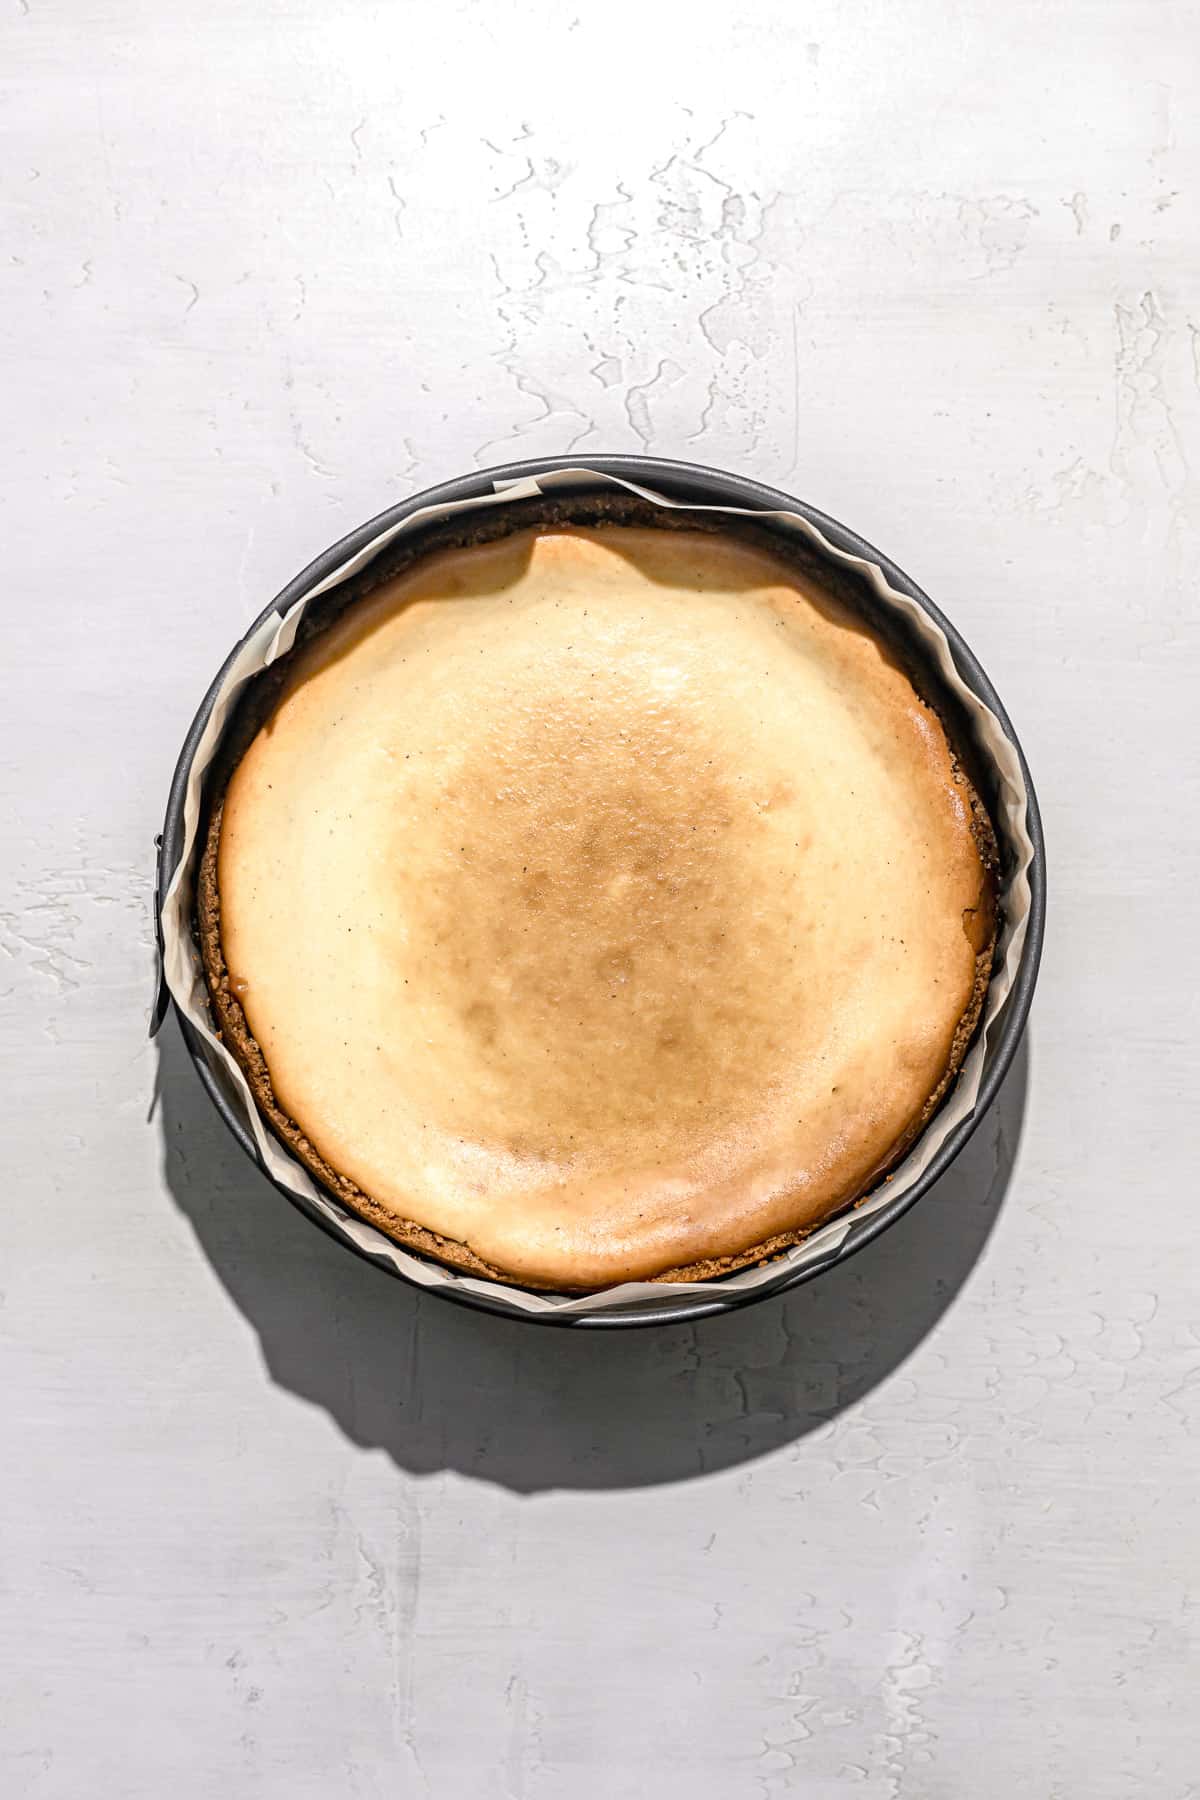 baked cheesecake in pan.